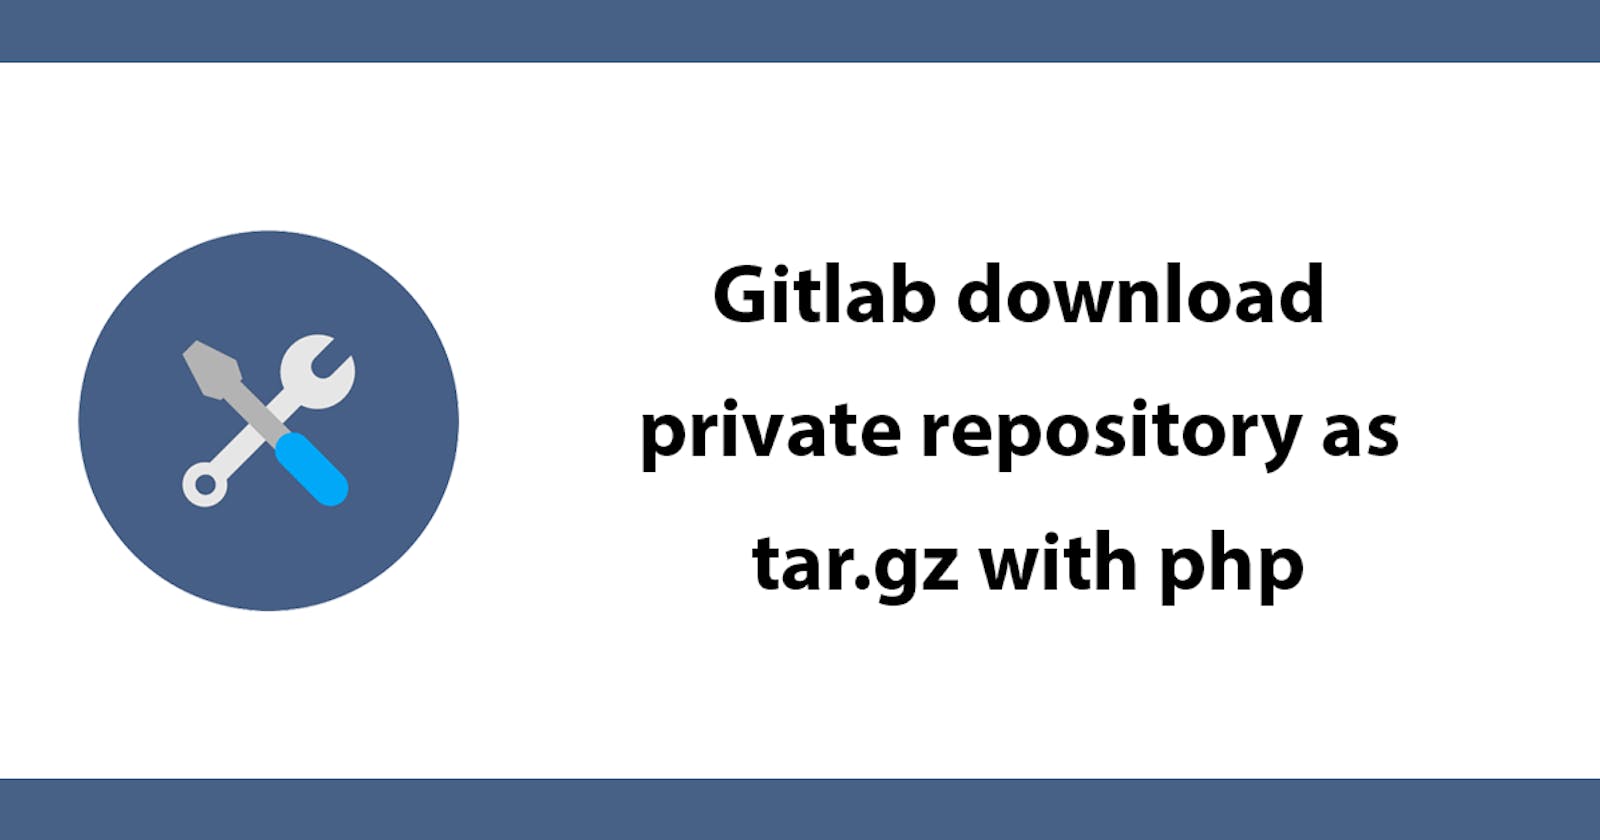 Gitlab download private repository as tar.gz with php